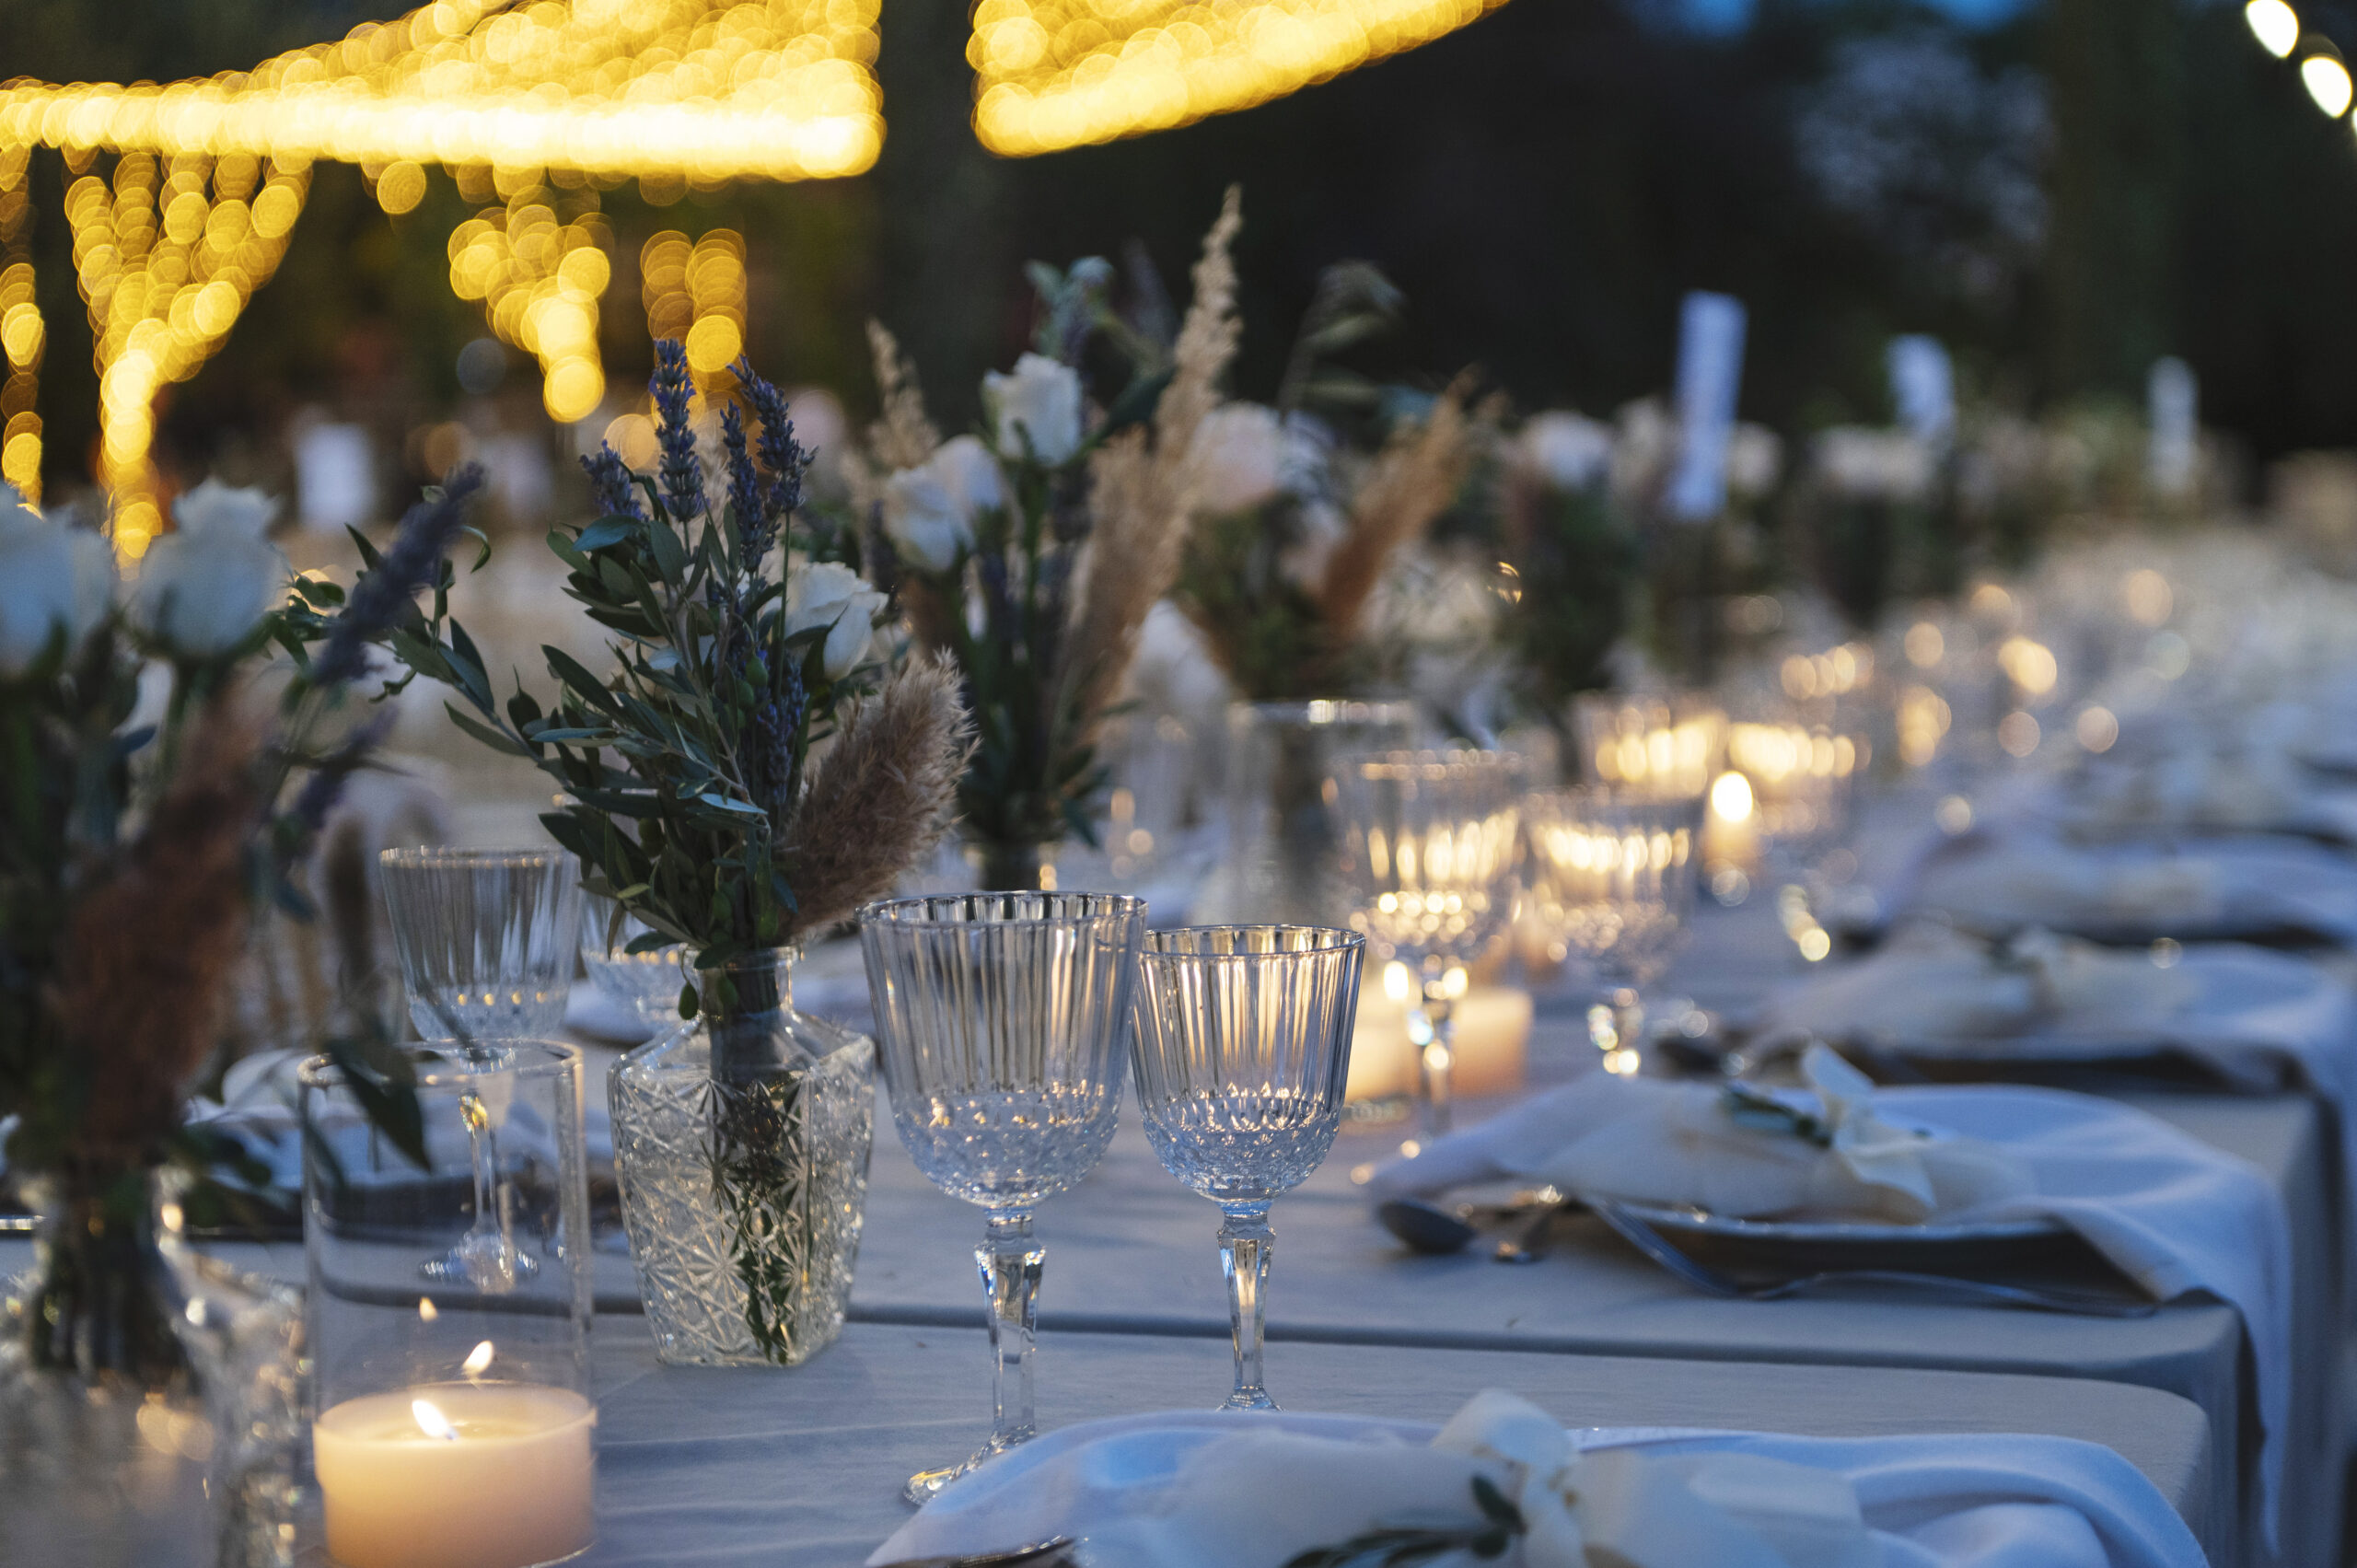 a-step-back-in-time-wedding-table-setup